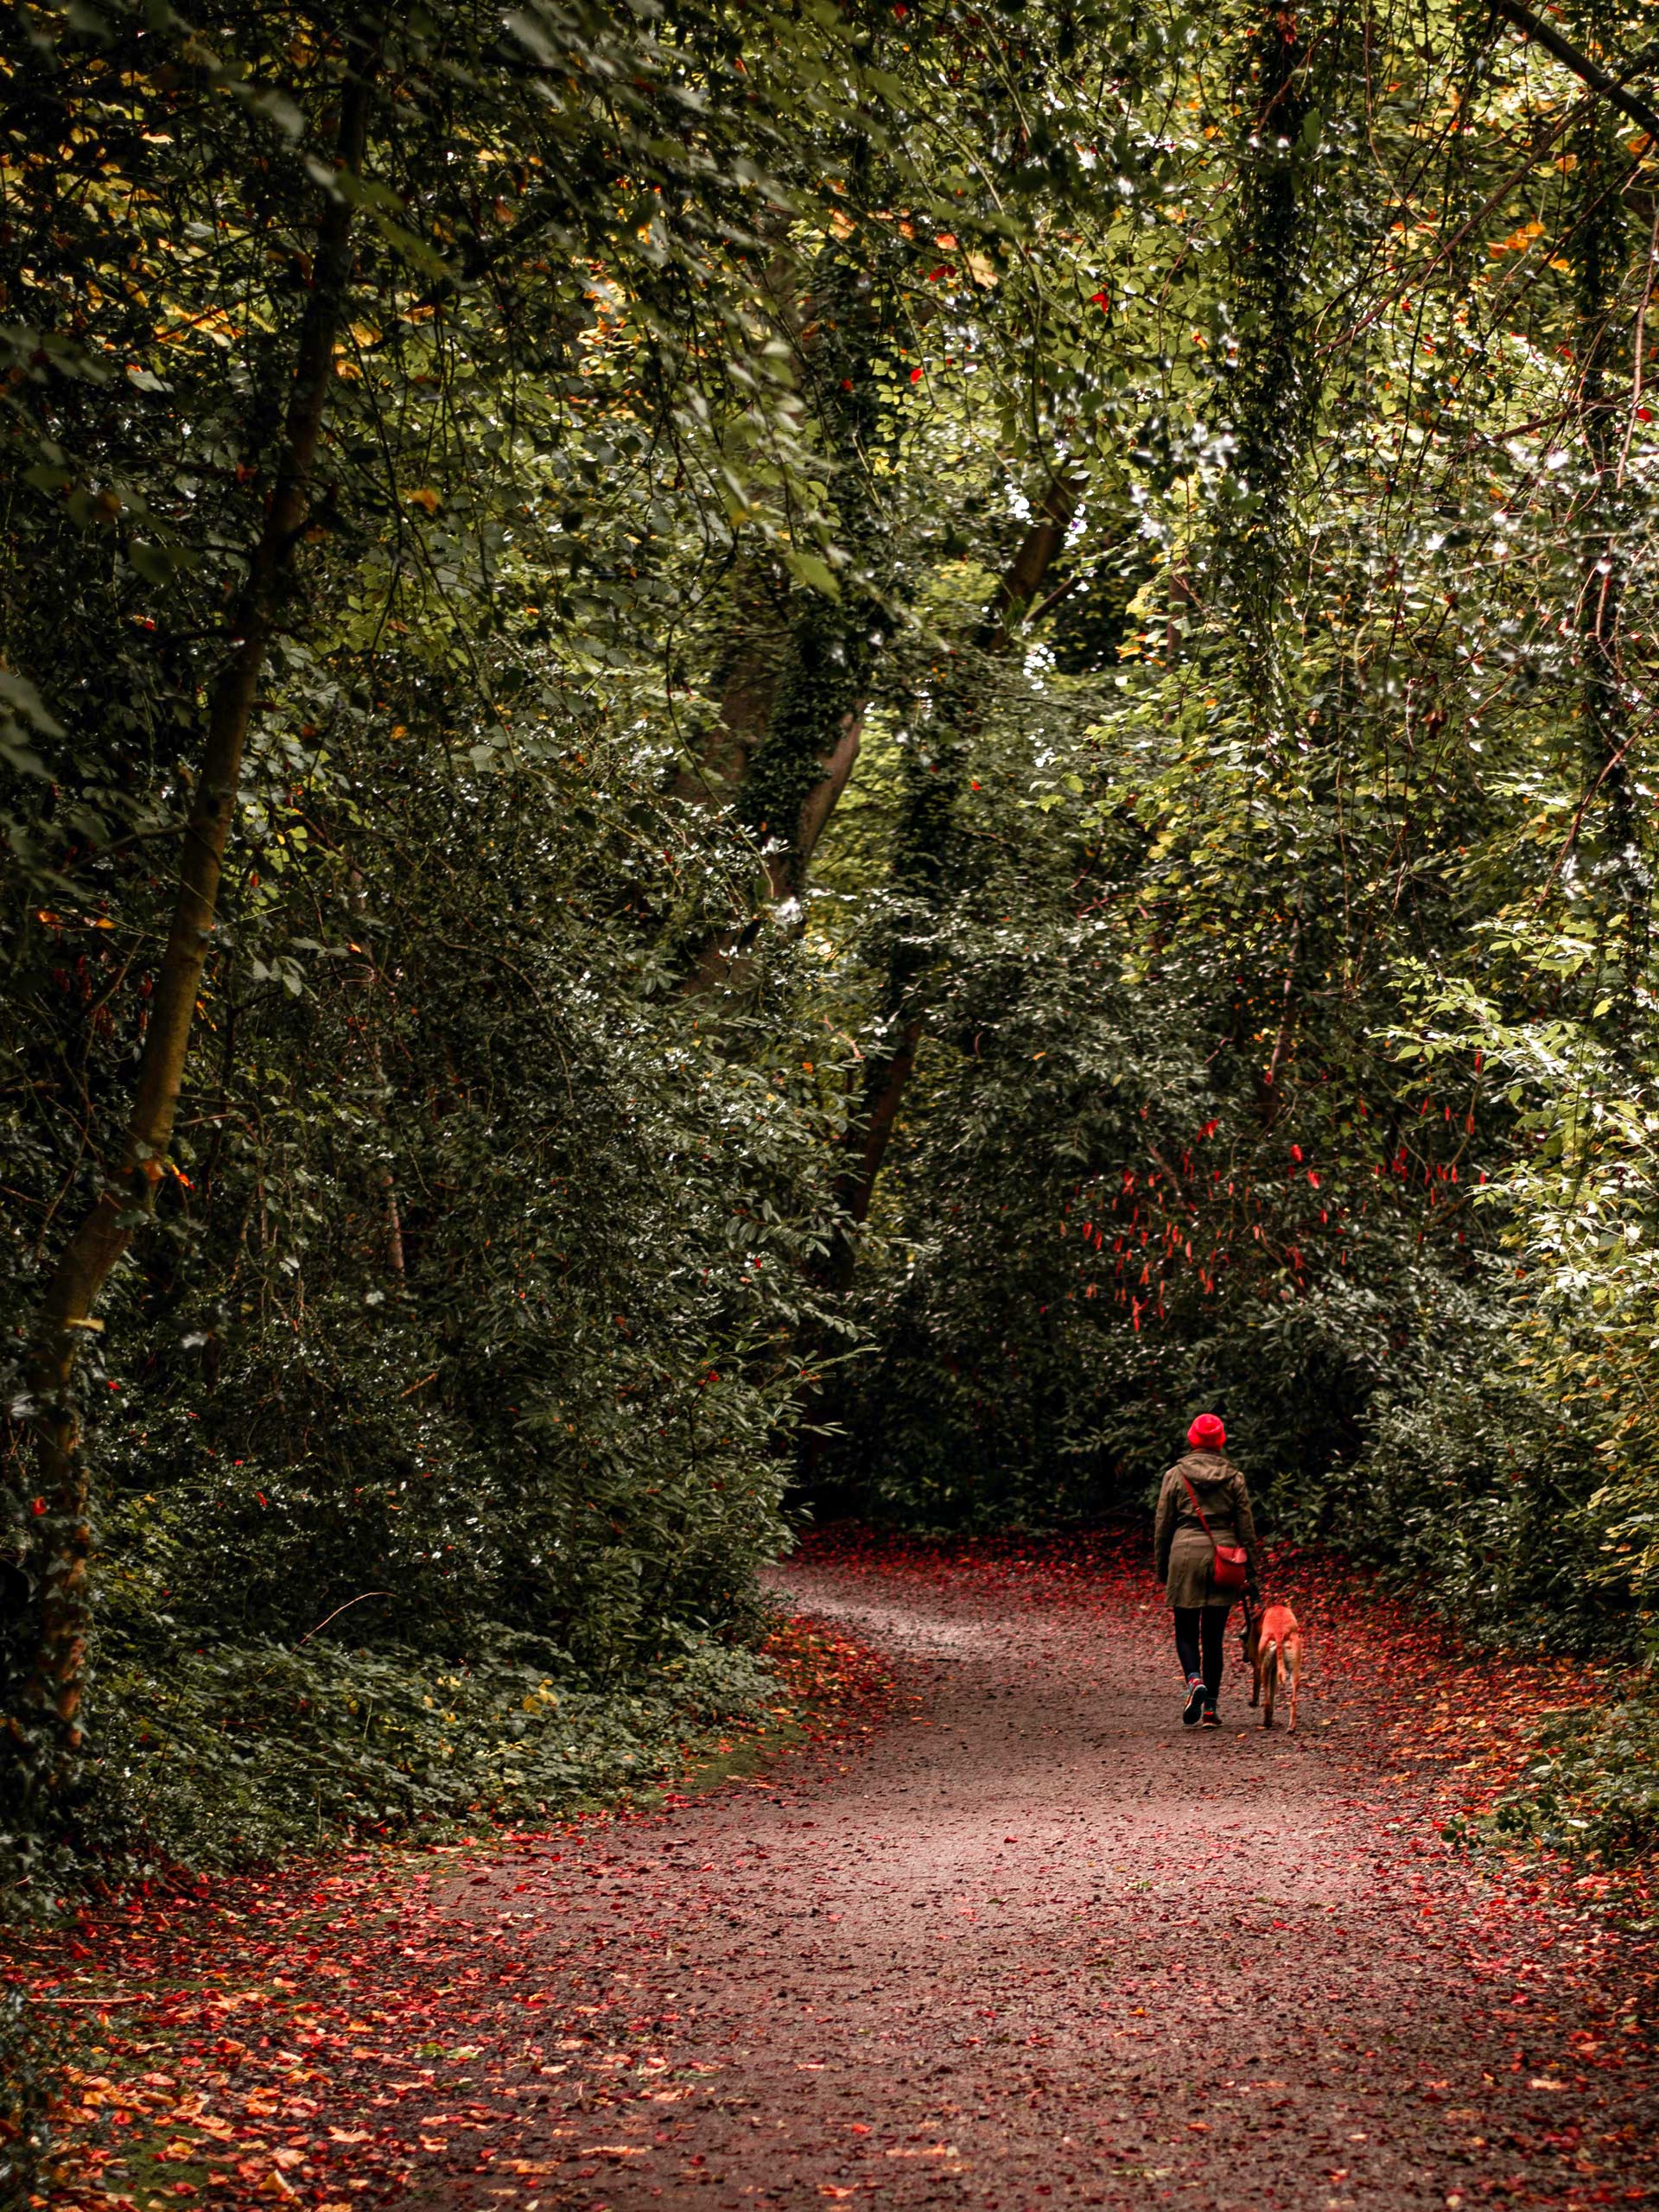 Dog walking surrounded by fall colors in Marlay Park, Rathfarnham, Ireland County Wicklow, Ireland